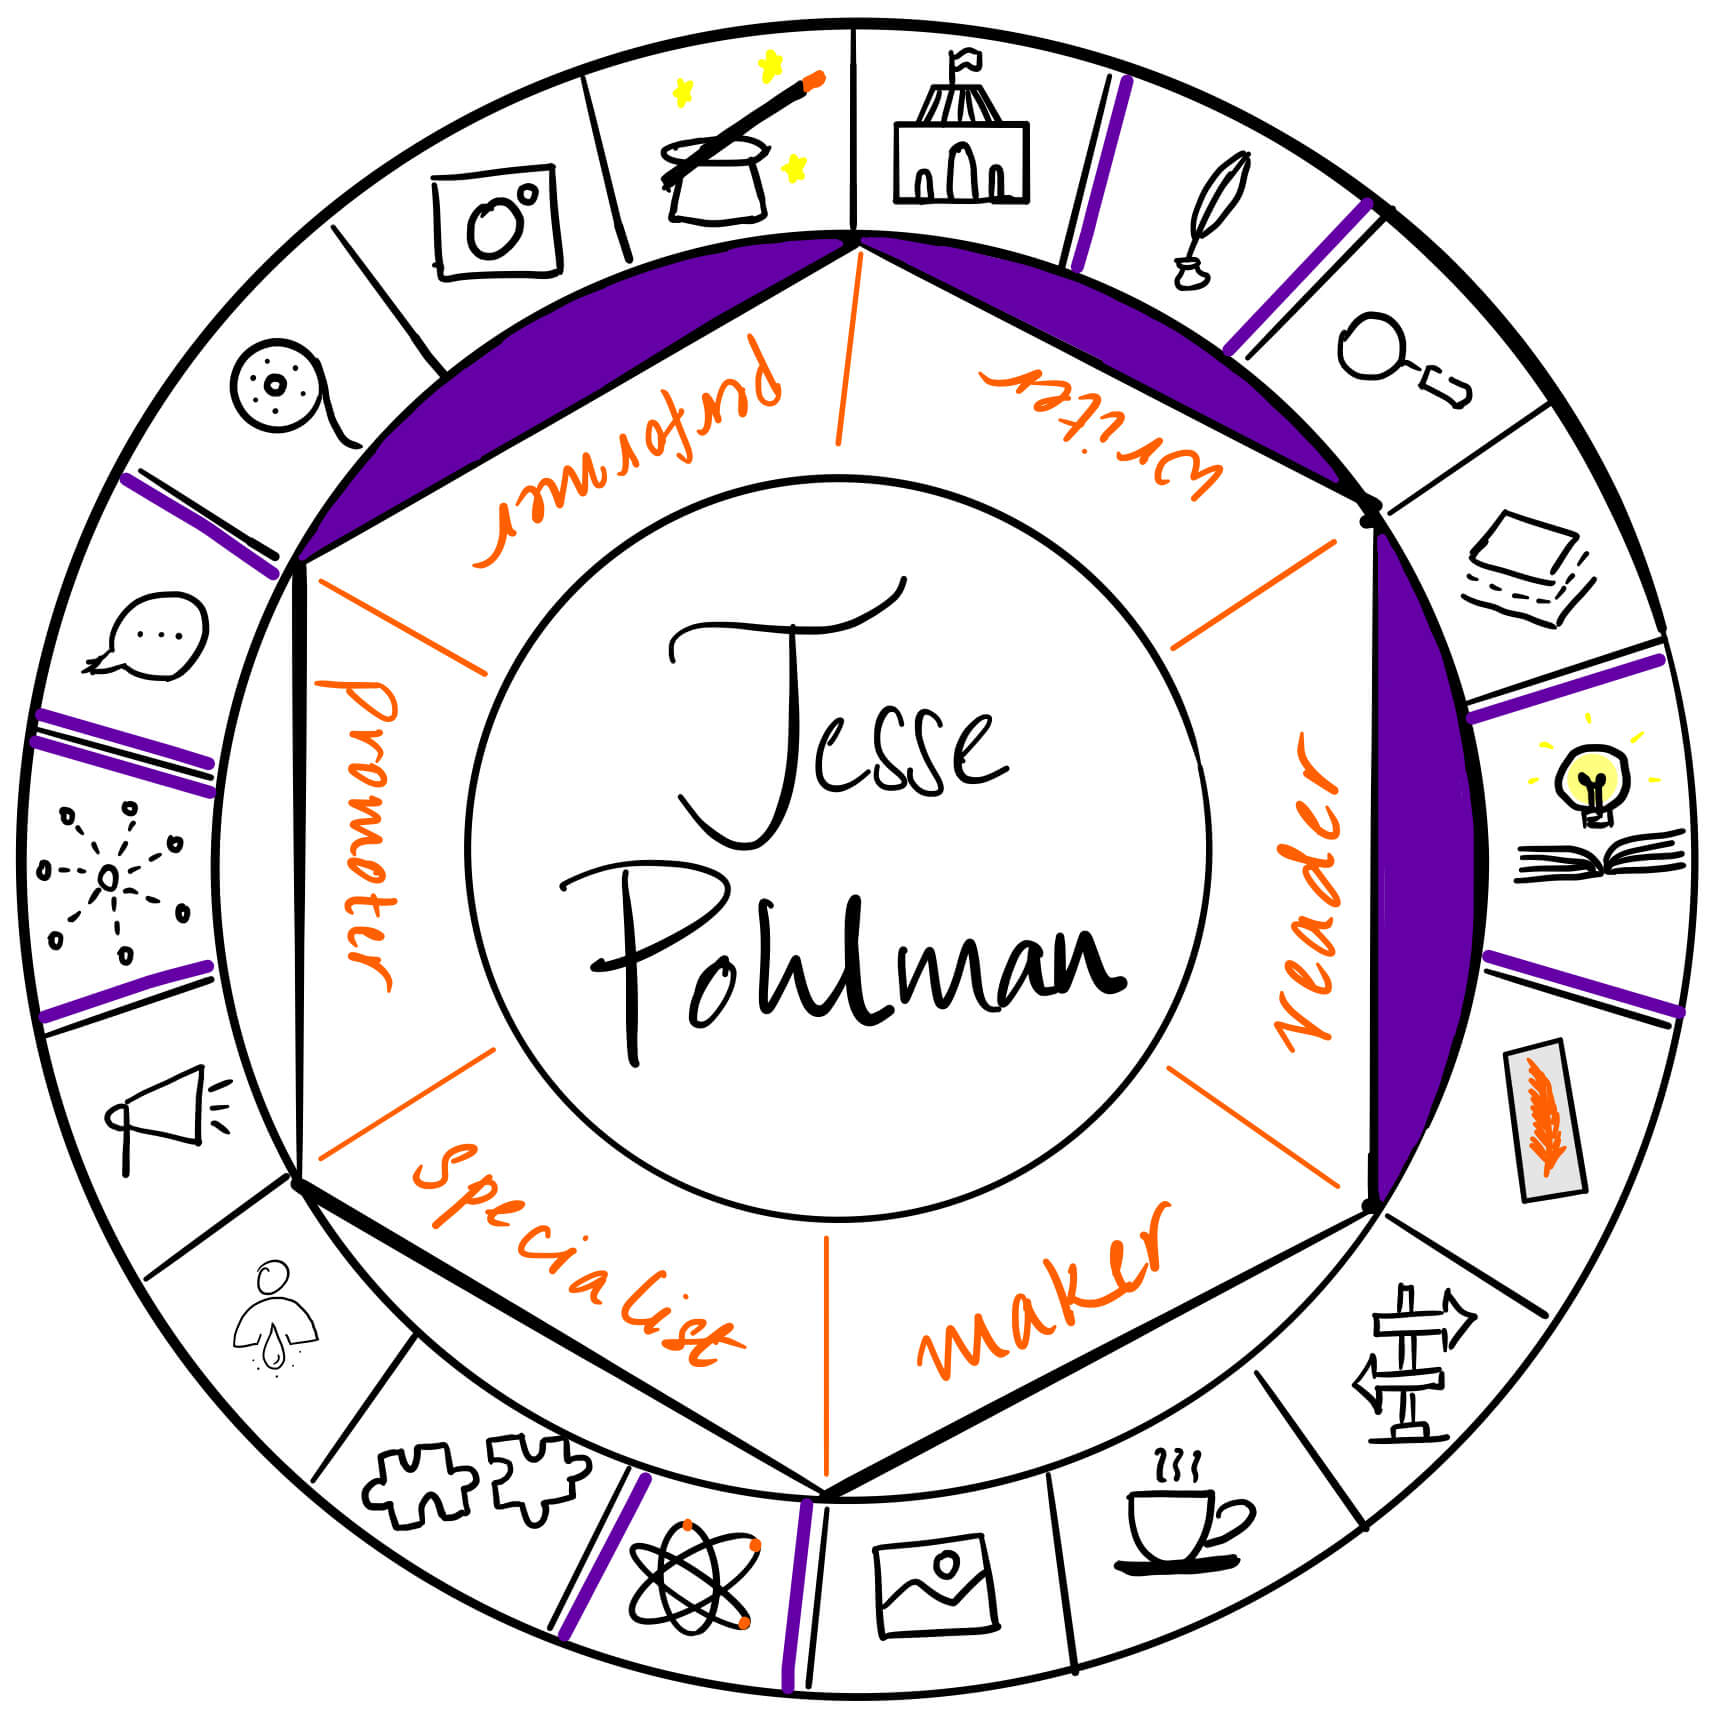 Jesse Pohlman is a writer, reader and performer. It's a pleasure to have him over on The Creator's Roulette to talk about revisions in publishing and revising your book.